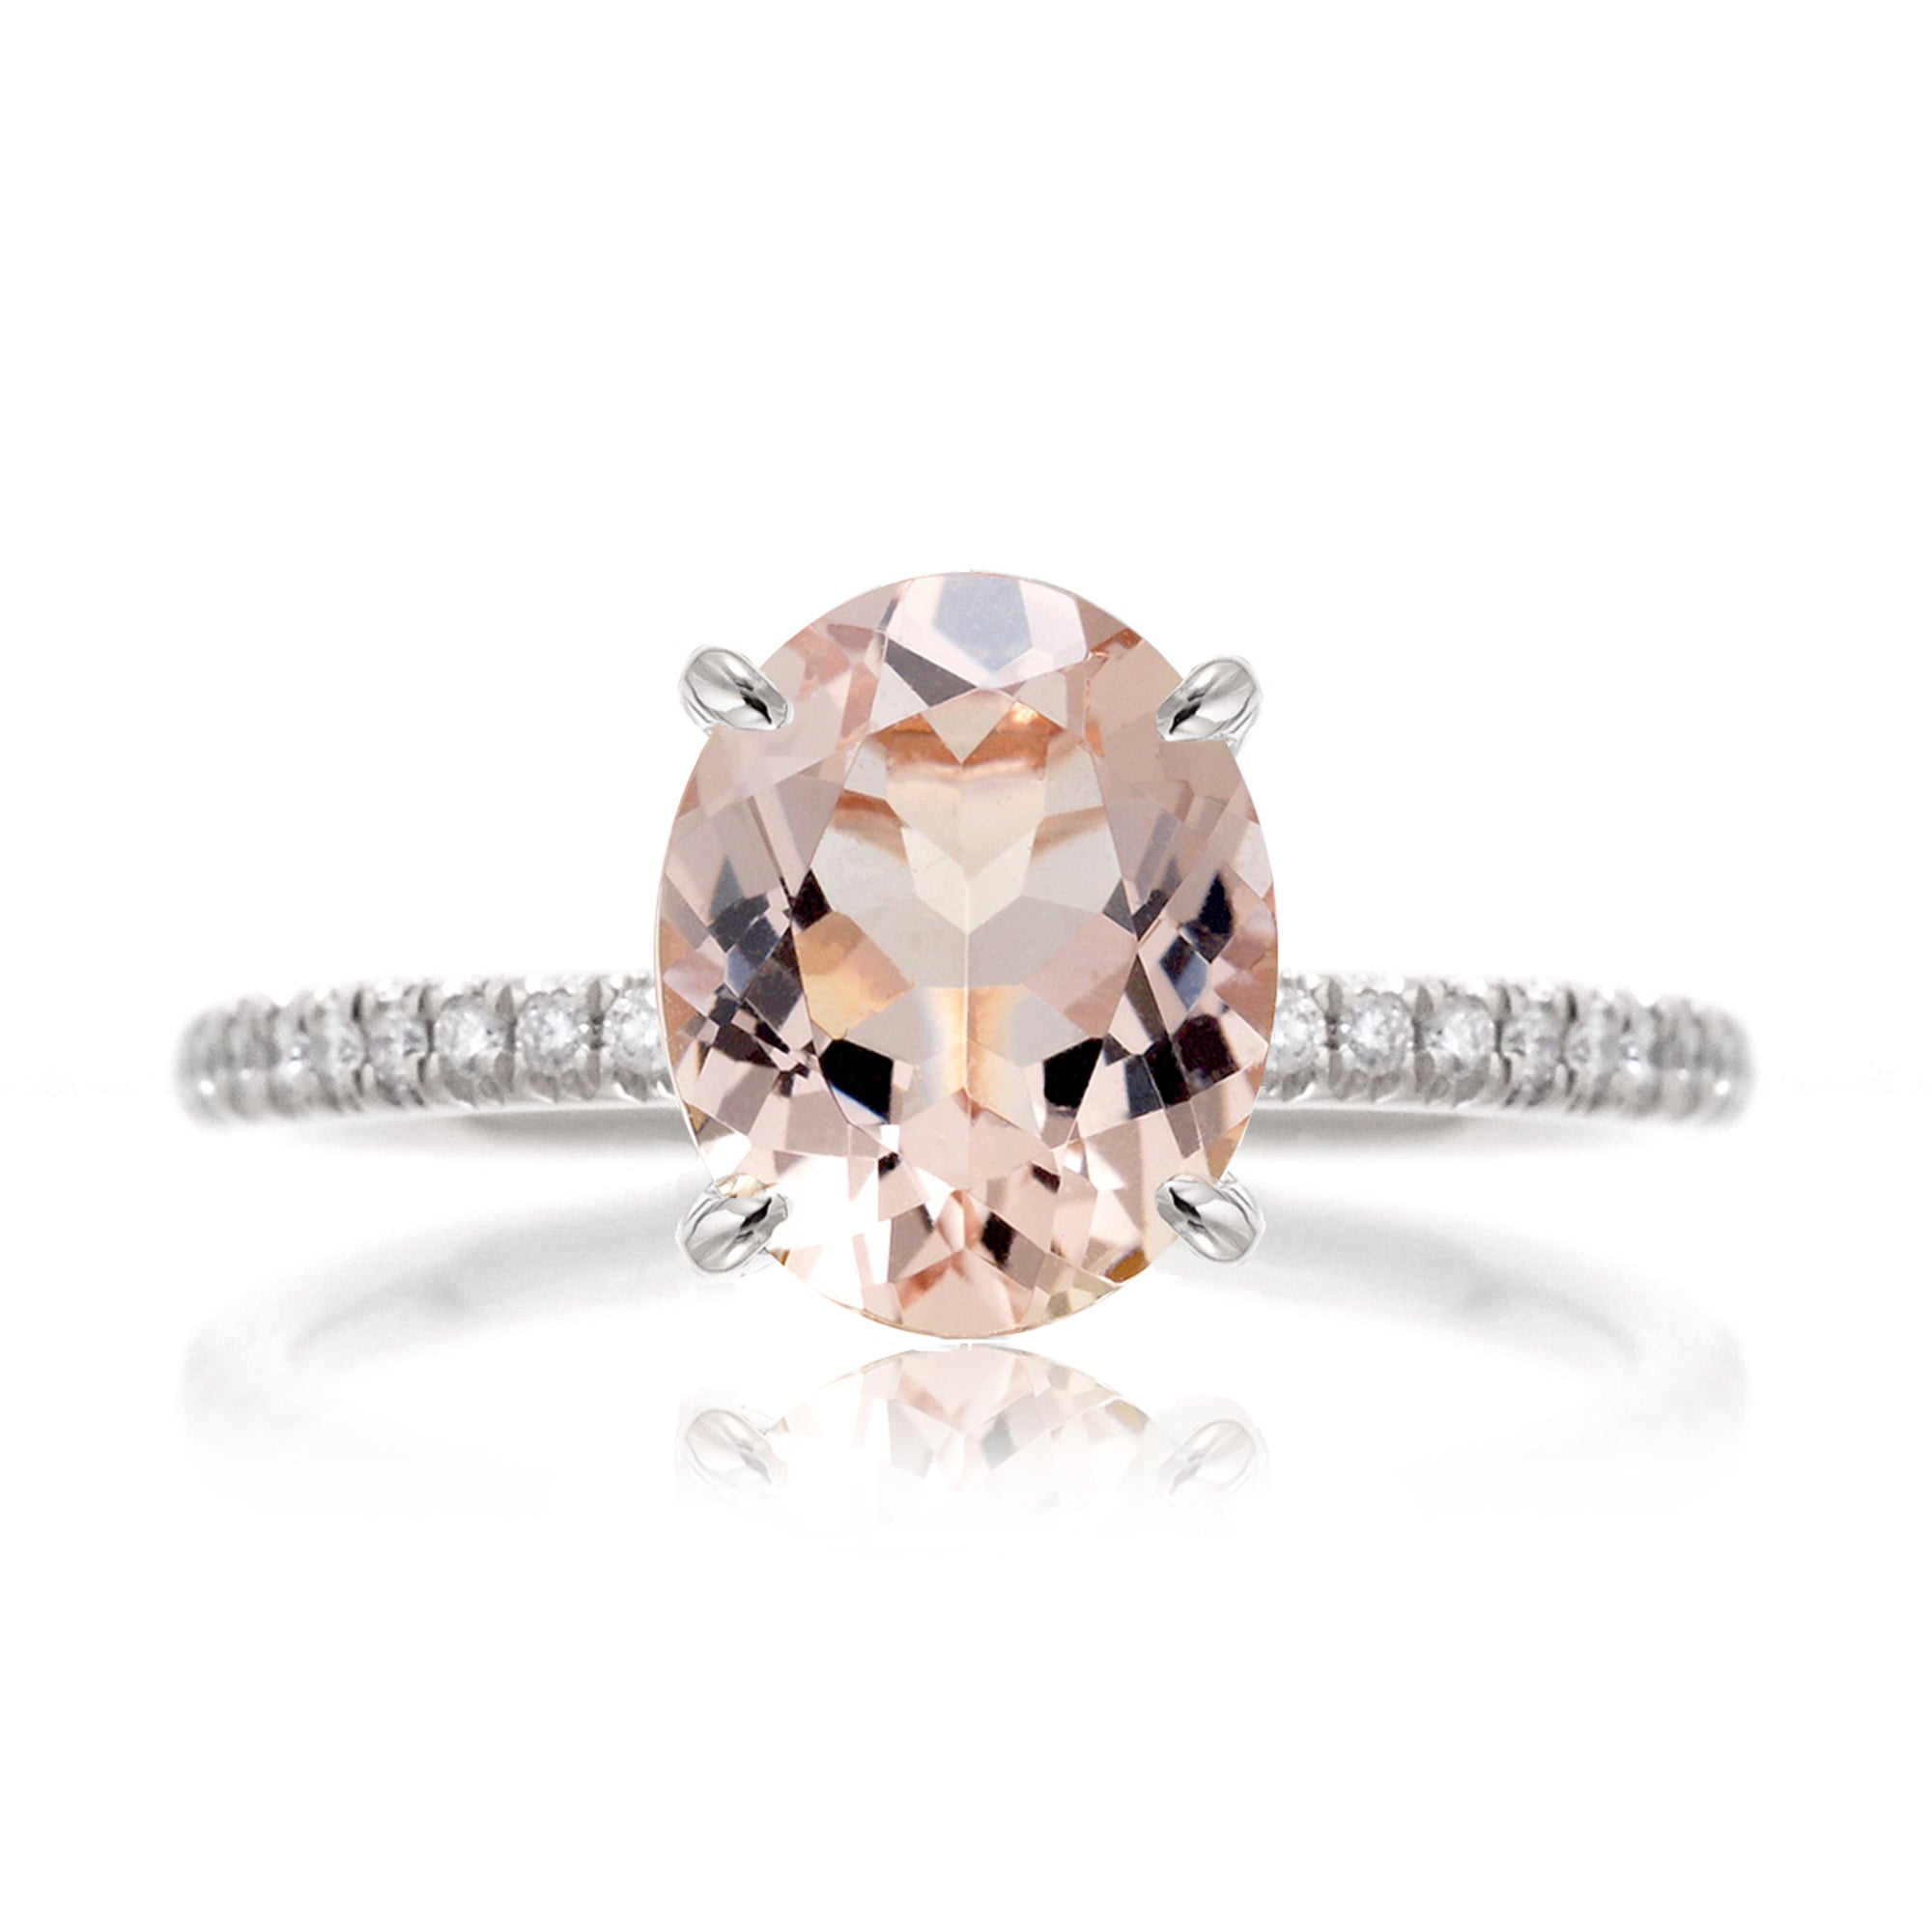 Oval morganite diamond band engagement ring white gold - The Ava